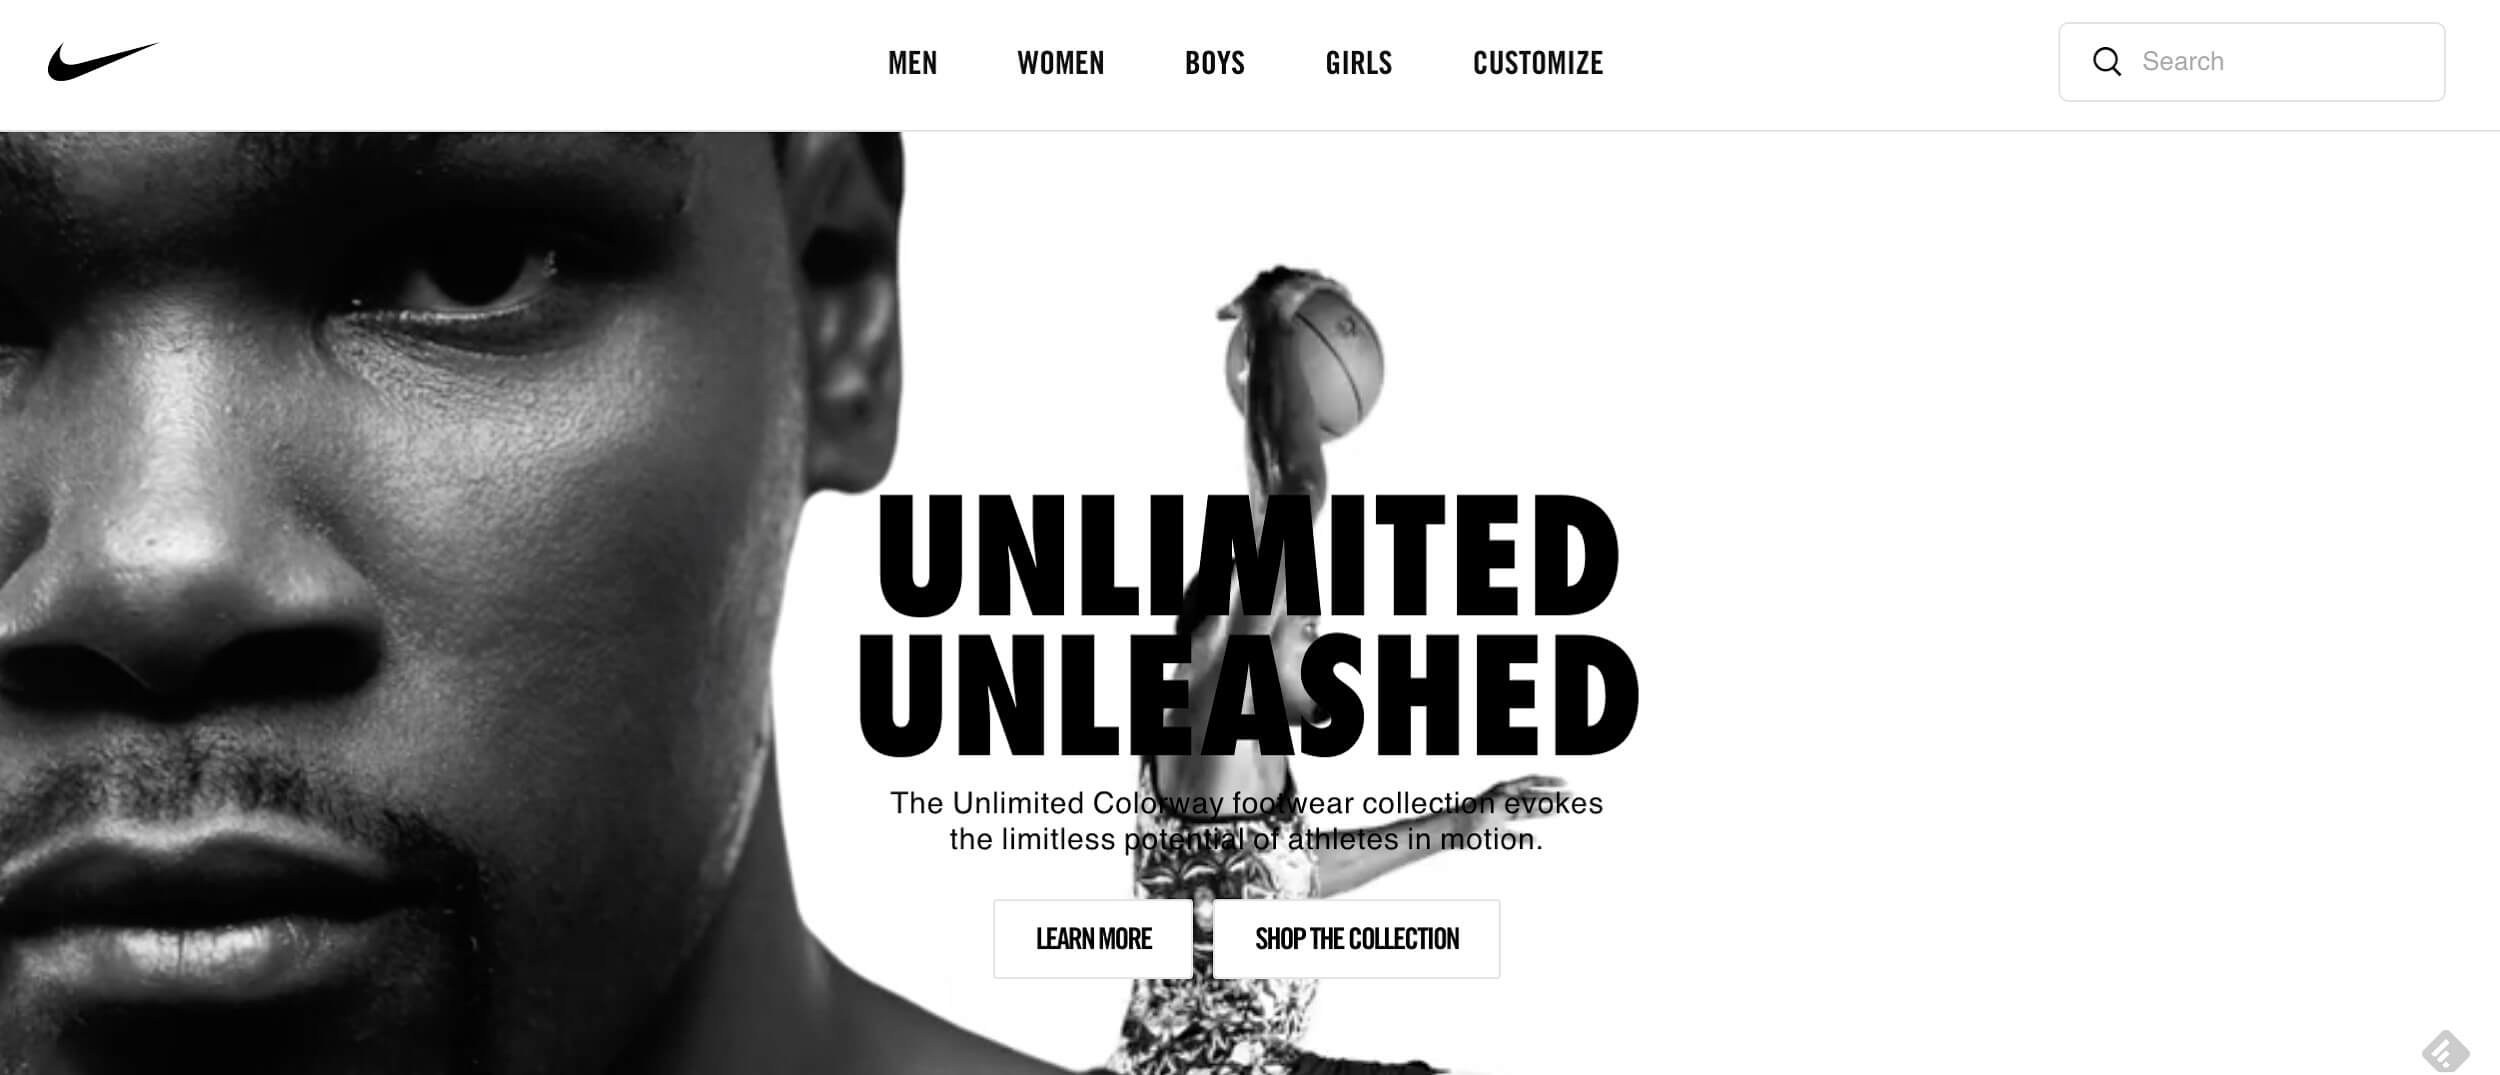 Example of Nike's visual commerce